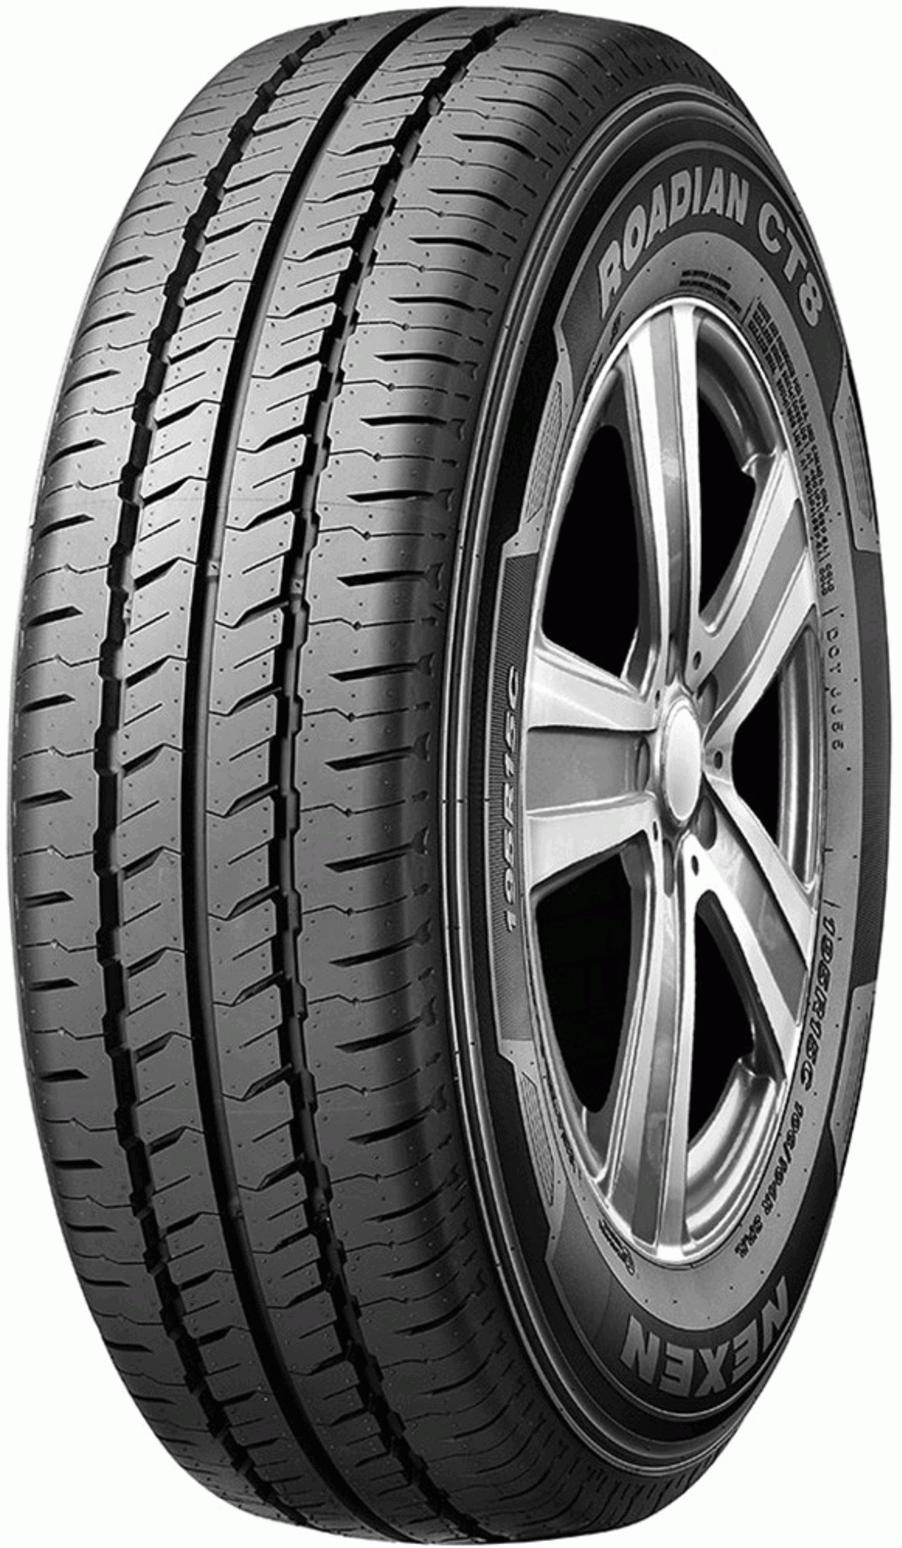 Nexen Roadian CT8 - Tire Reviews and Tests